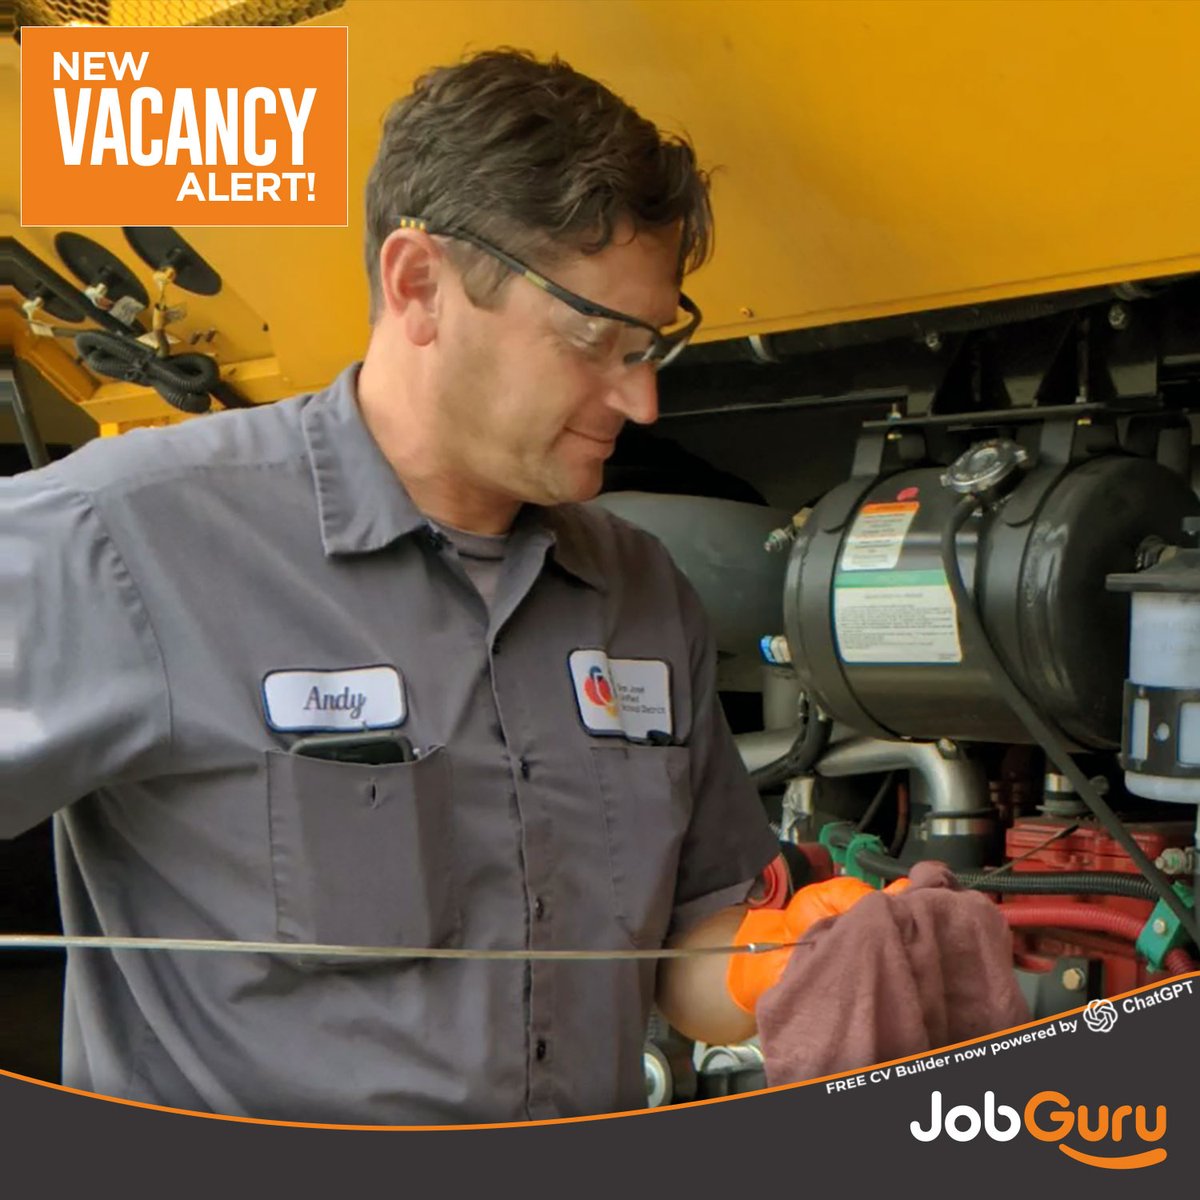 🚌🛠️ Join us at Sigmar Recruitment for an exciting opportunity as a Bus Mechanic in Ireland! Work with an environmentally-minded company, enjoy great career growth, and competitive benefits. Apply now! jobguru.ie/vacancy/bus-me…🚀 #BusMechanic #JobOpportunity #IrelandJobs 🇮🇪